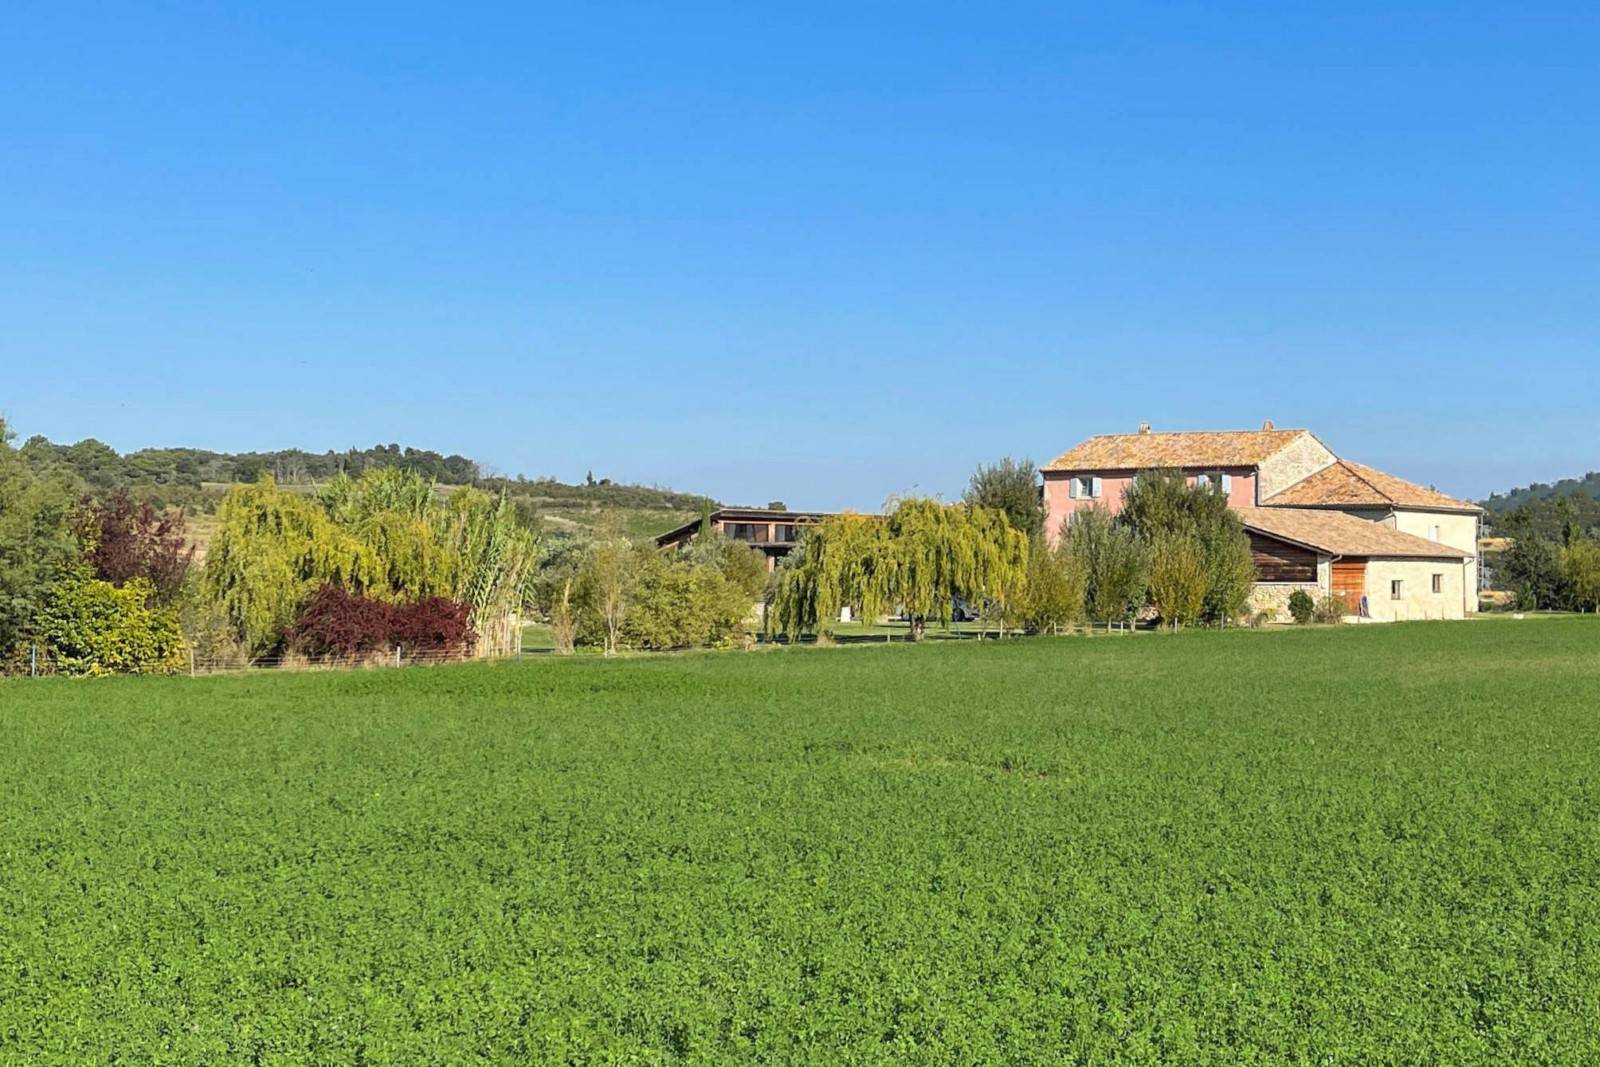 Drôme Provençale, 17th century manor house with open views, indoor pool and tennis court. 